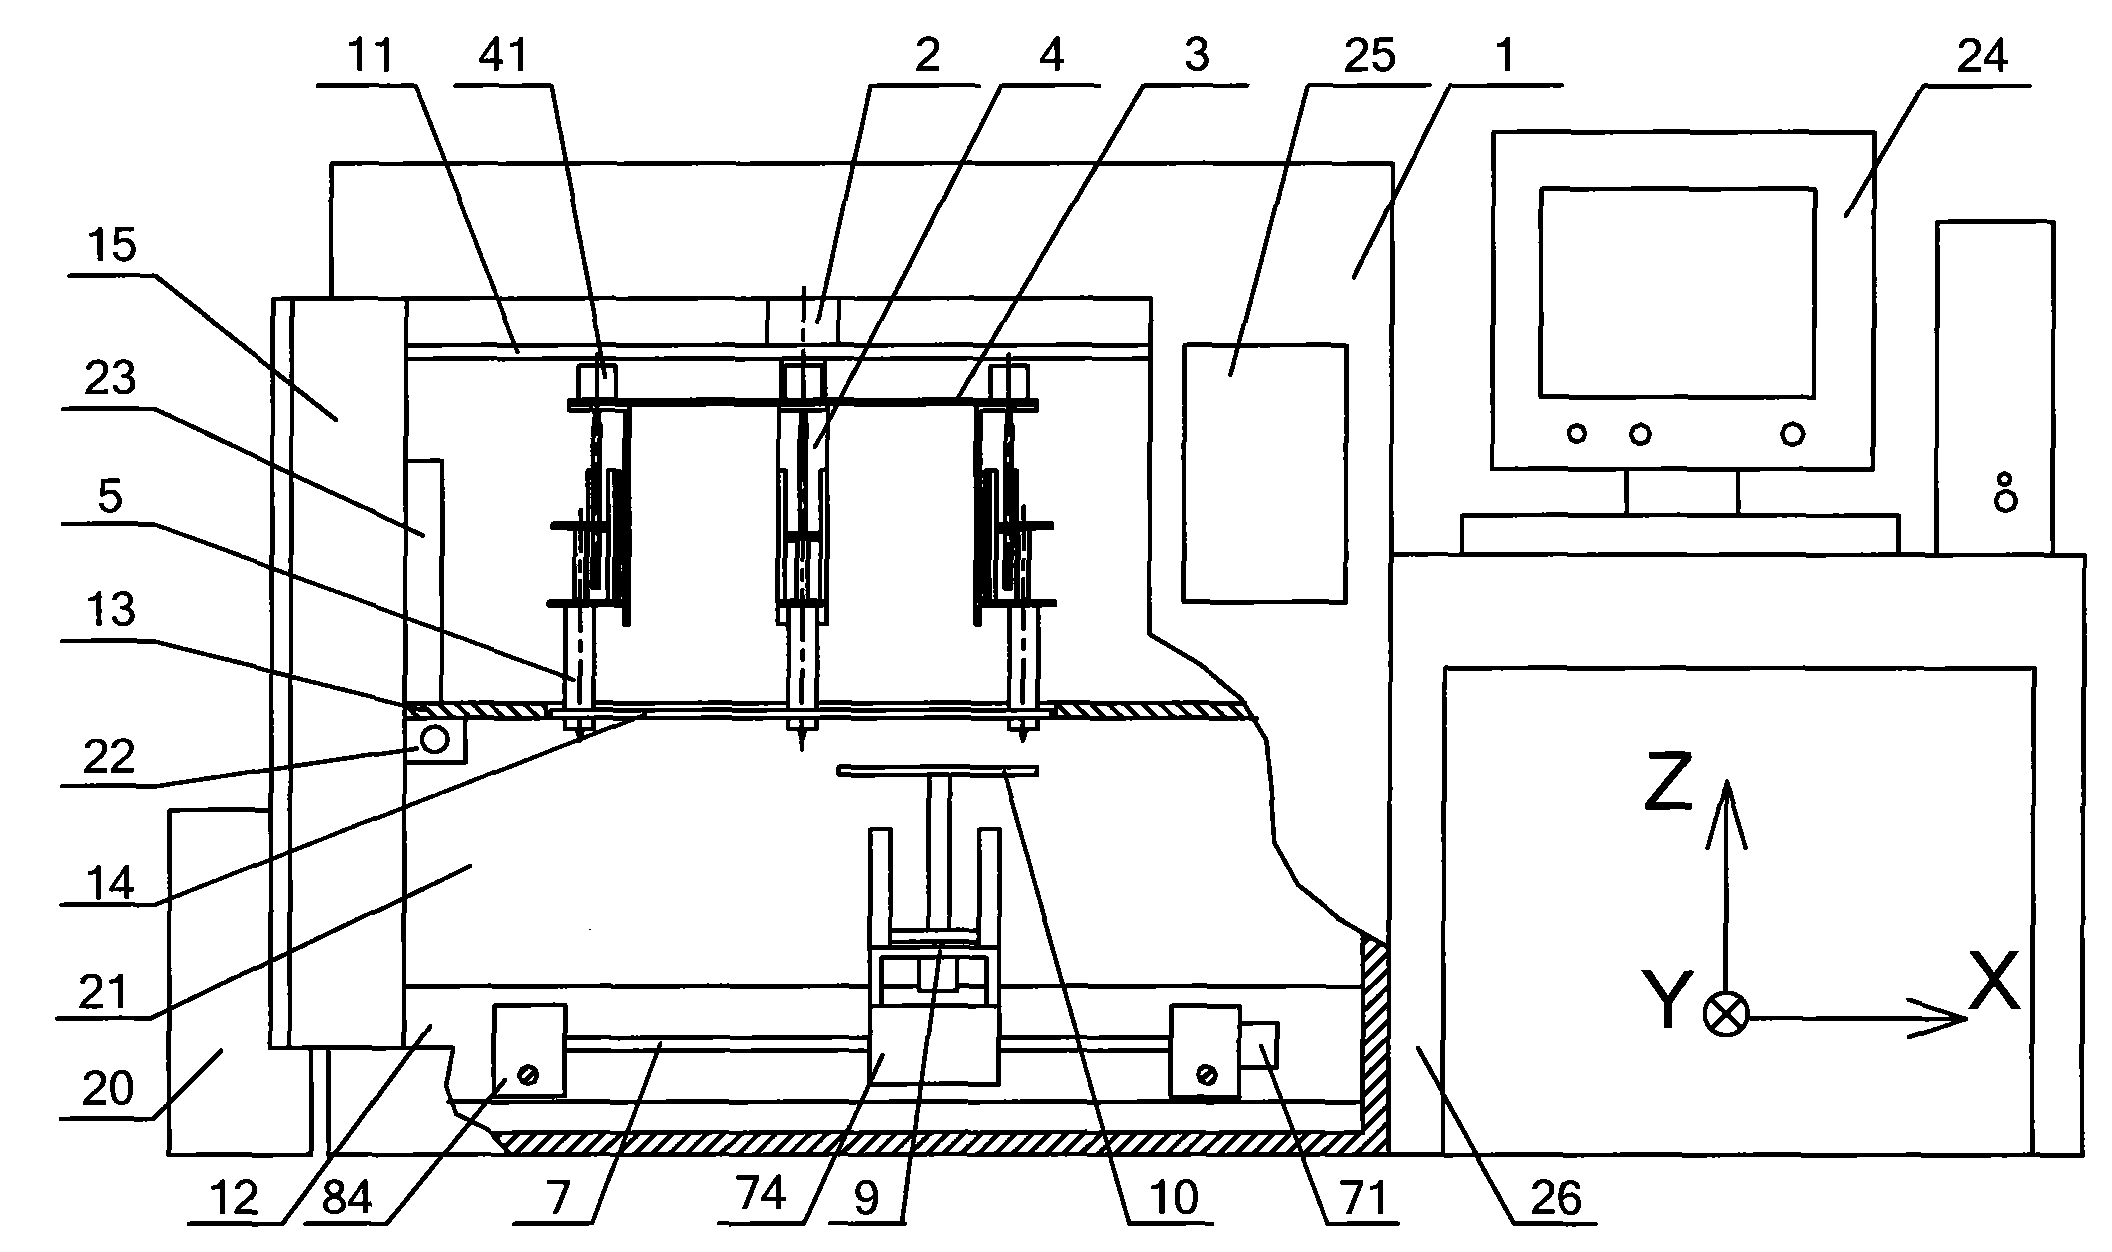 Rotating disc type multi-nozzle three-dimensional controlled forming system for complex organ precursor